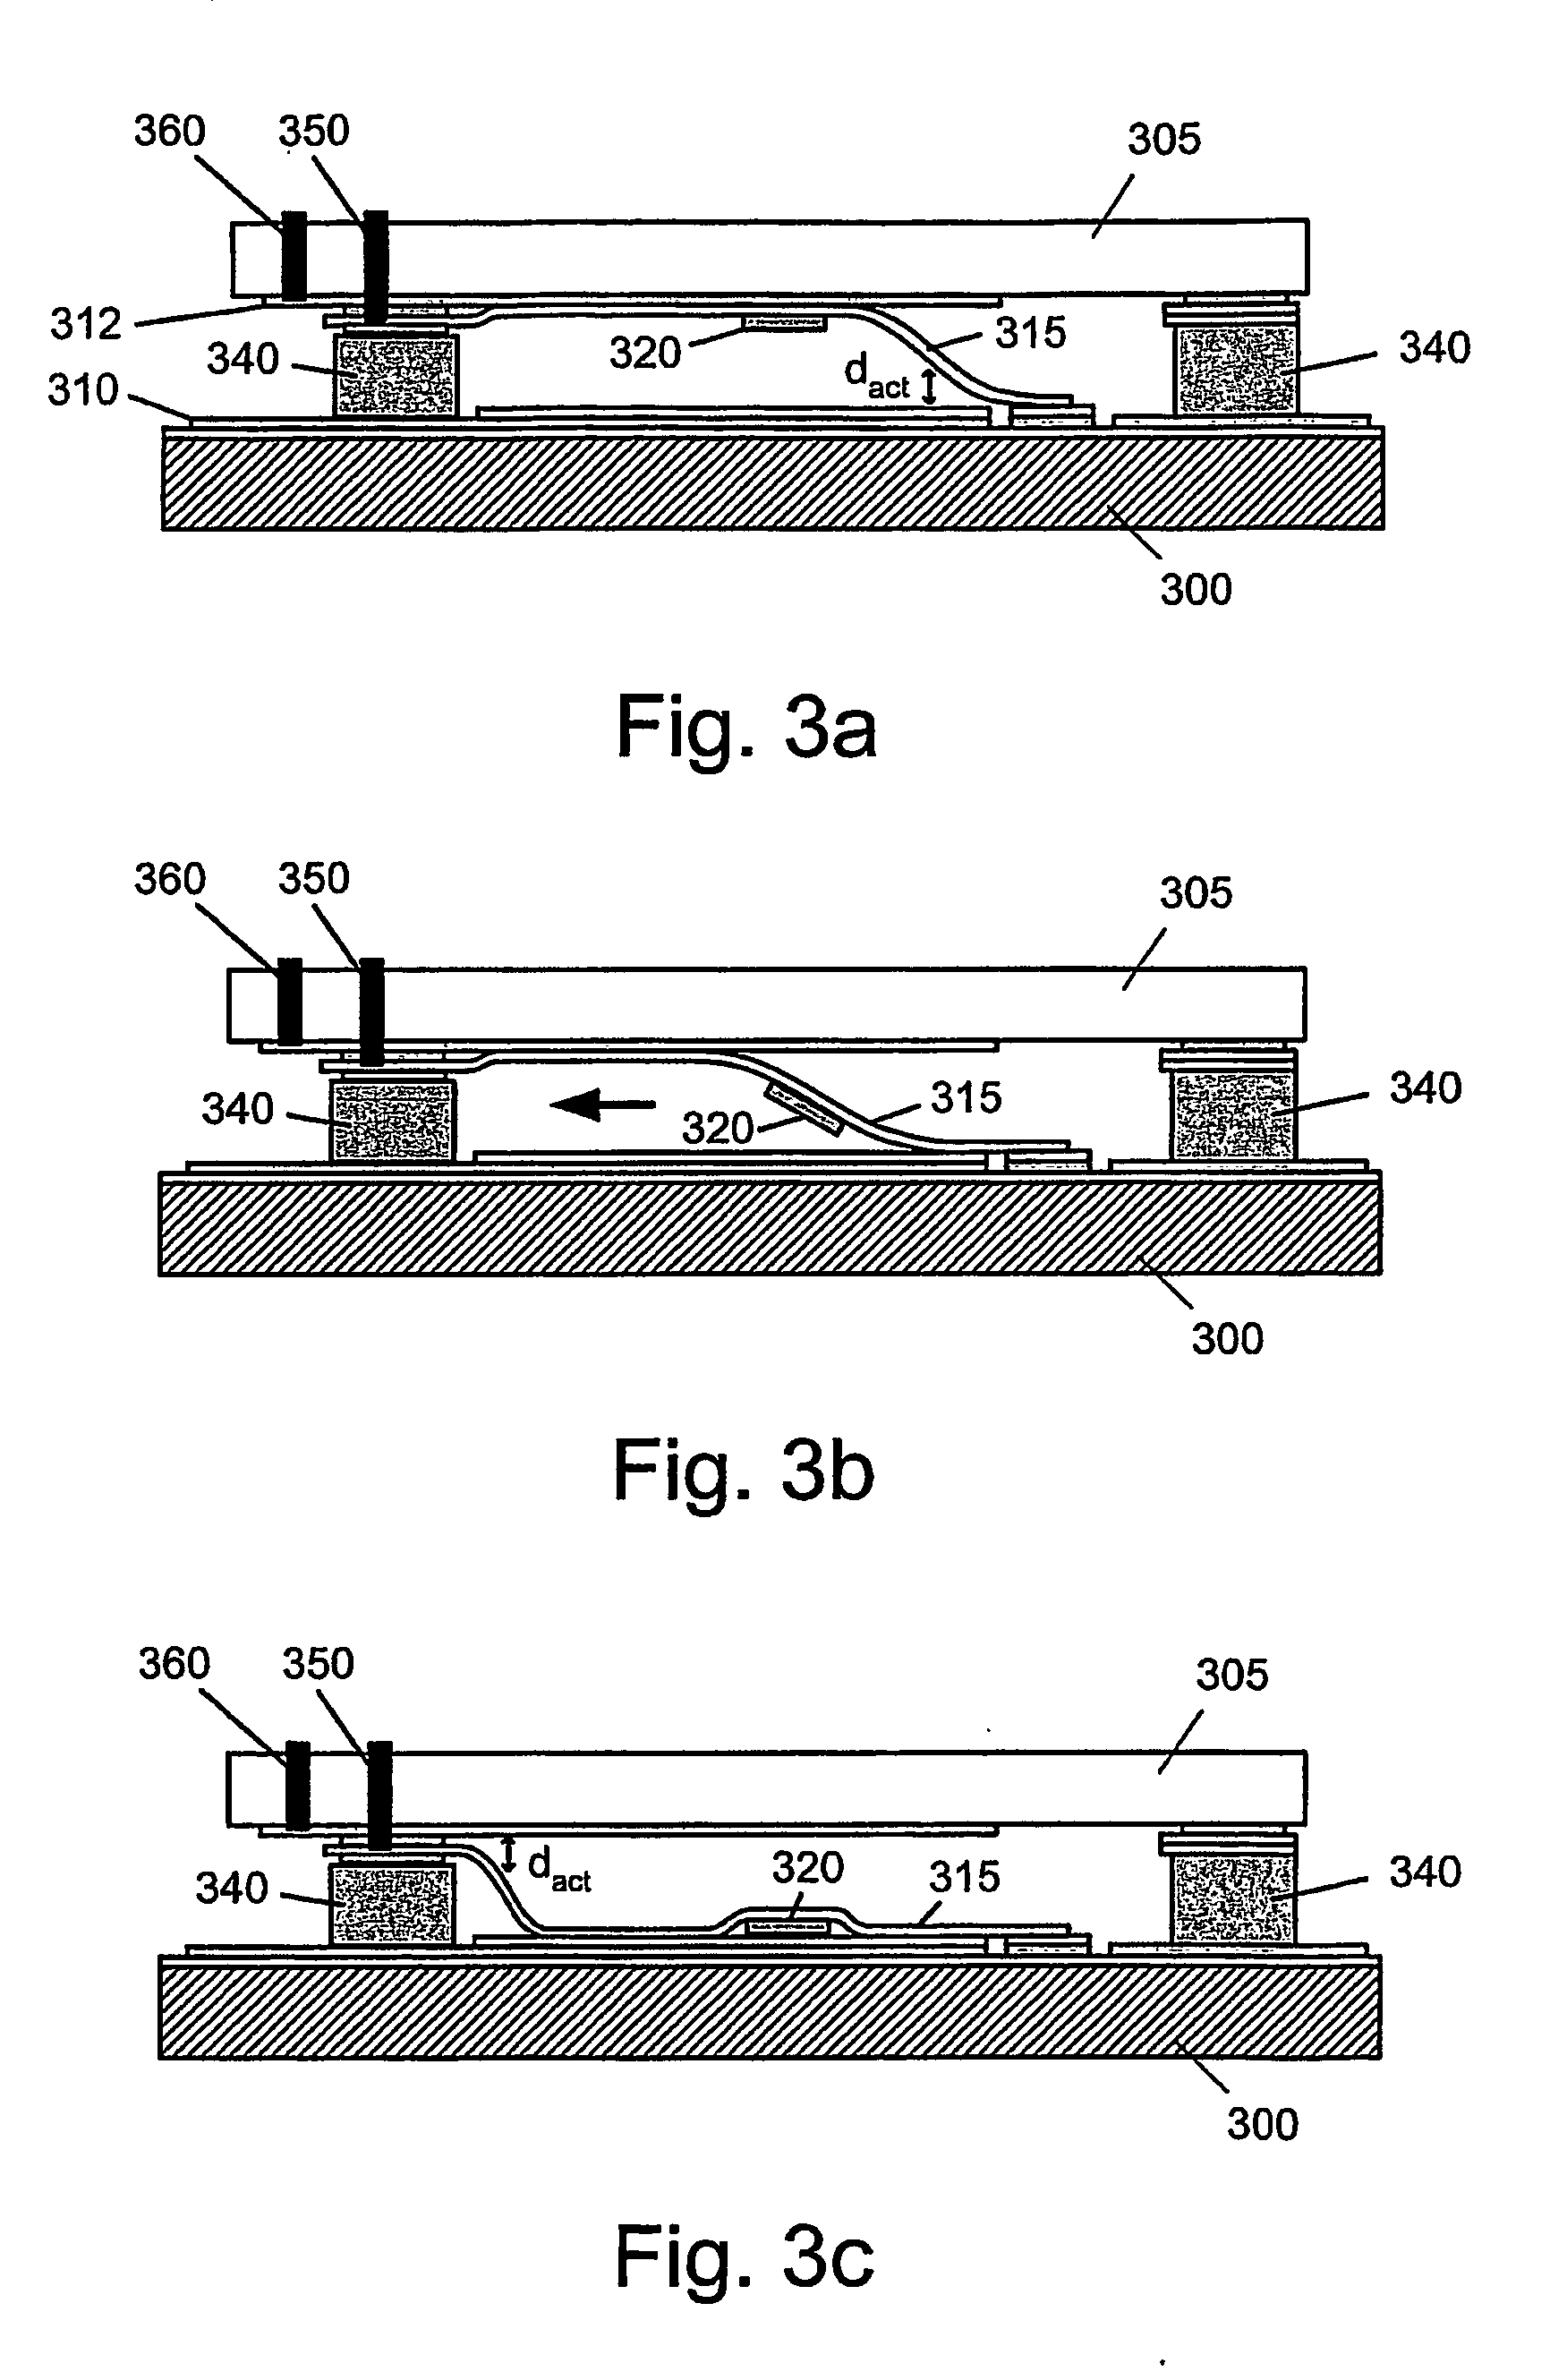 Film Actuator Based Mems Device and Method